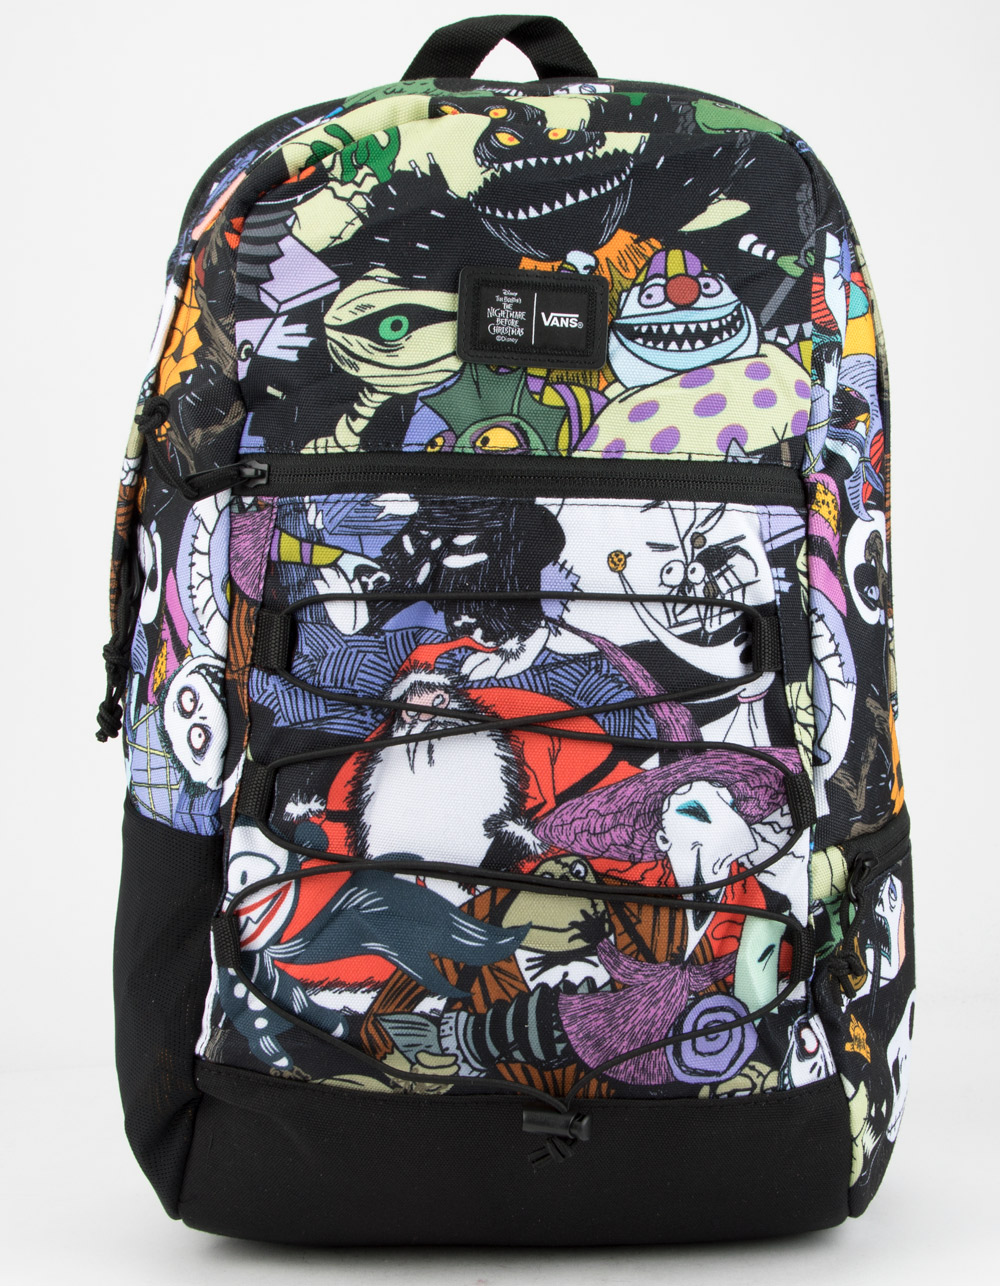 Jack Skellington, Sally, Oogie Boogie, Zero, and all the residents of Halloween Town on the Snag Plus backpack.